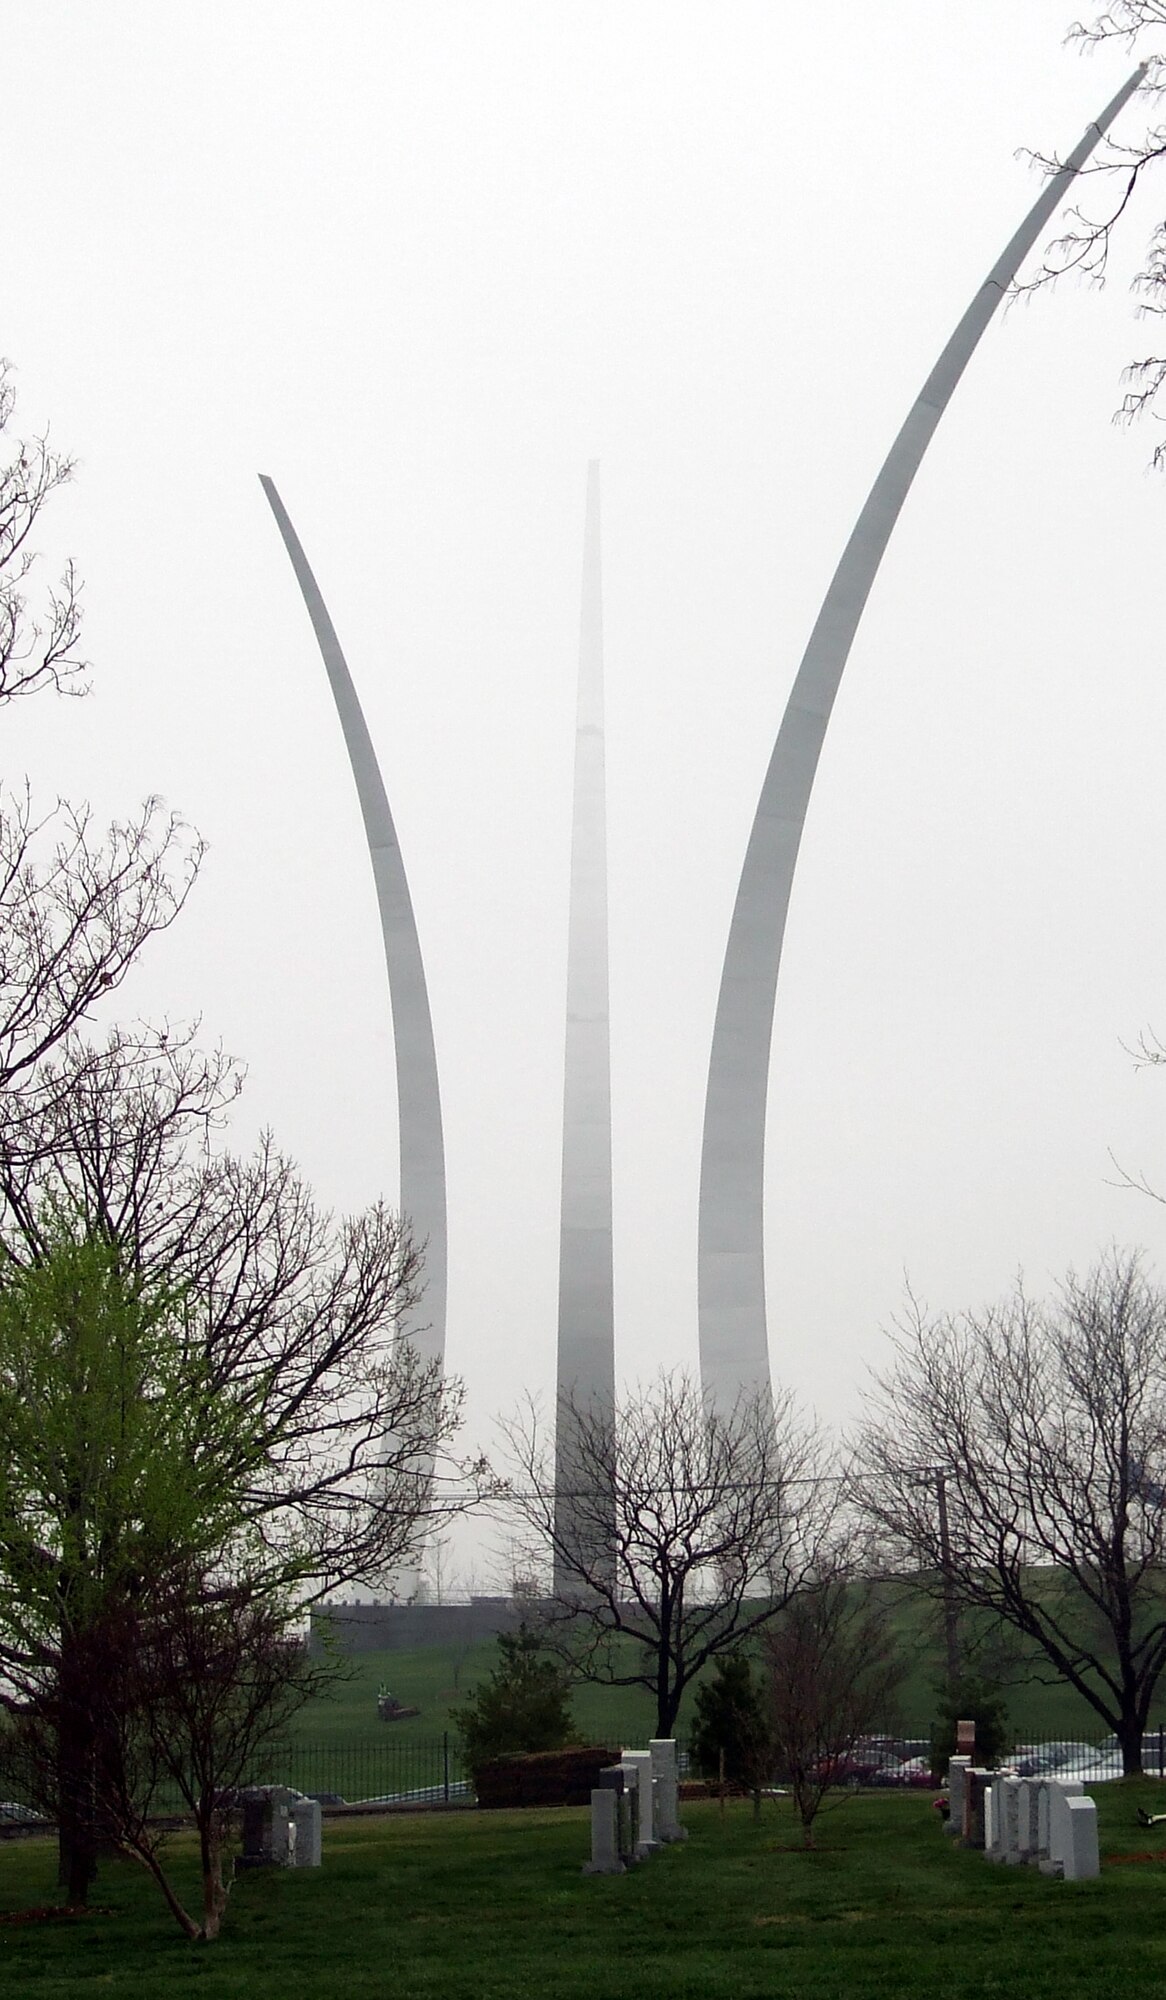 The Air Force Memorial is seen beyond the grounds of Arlington National Cemetery April 9, 2008.  The memorial is the only national memorial dedicated to the United States Air Force.  (U.S. Air Force Photo/Tech. Sgt. Scott T. Sturkol)